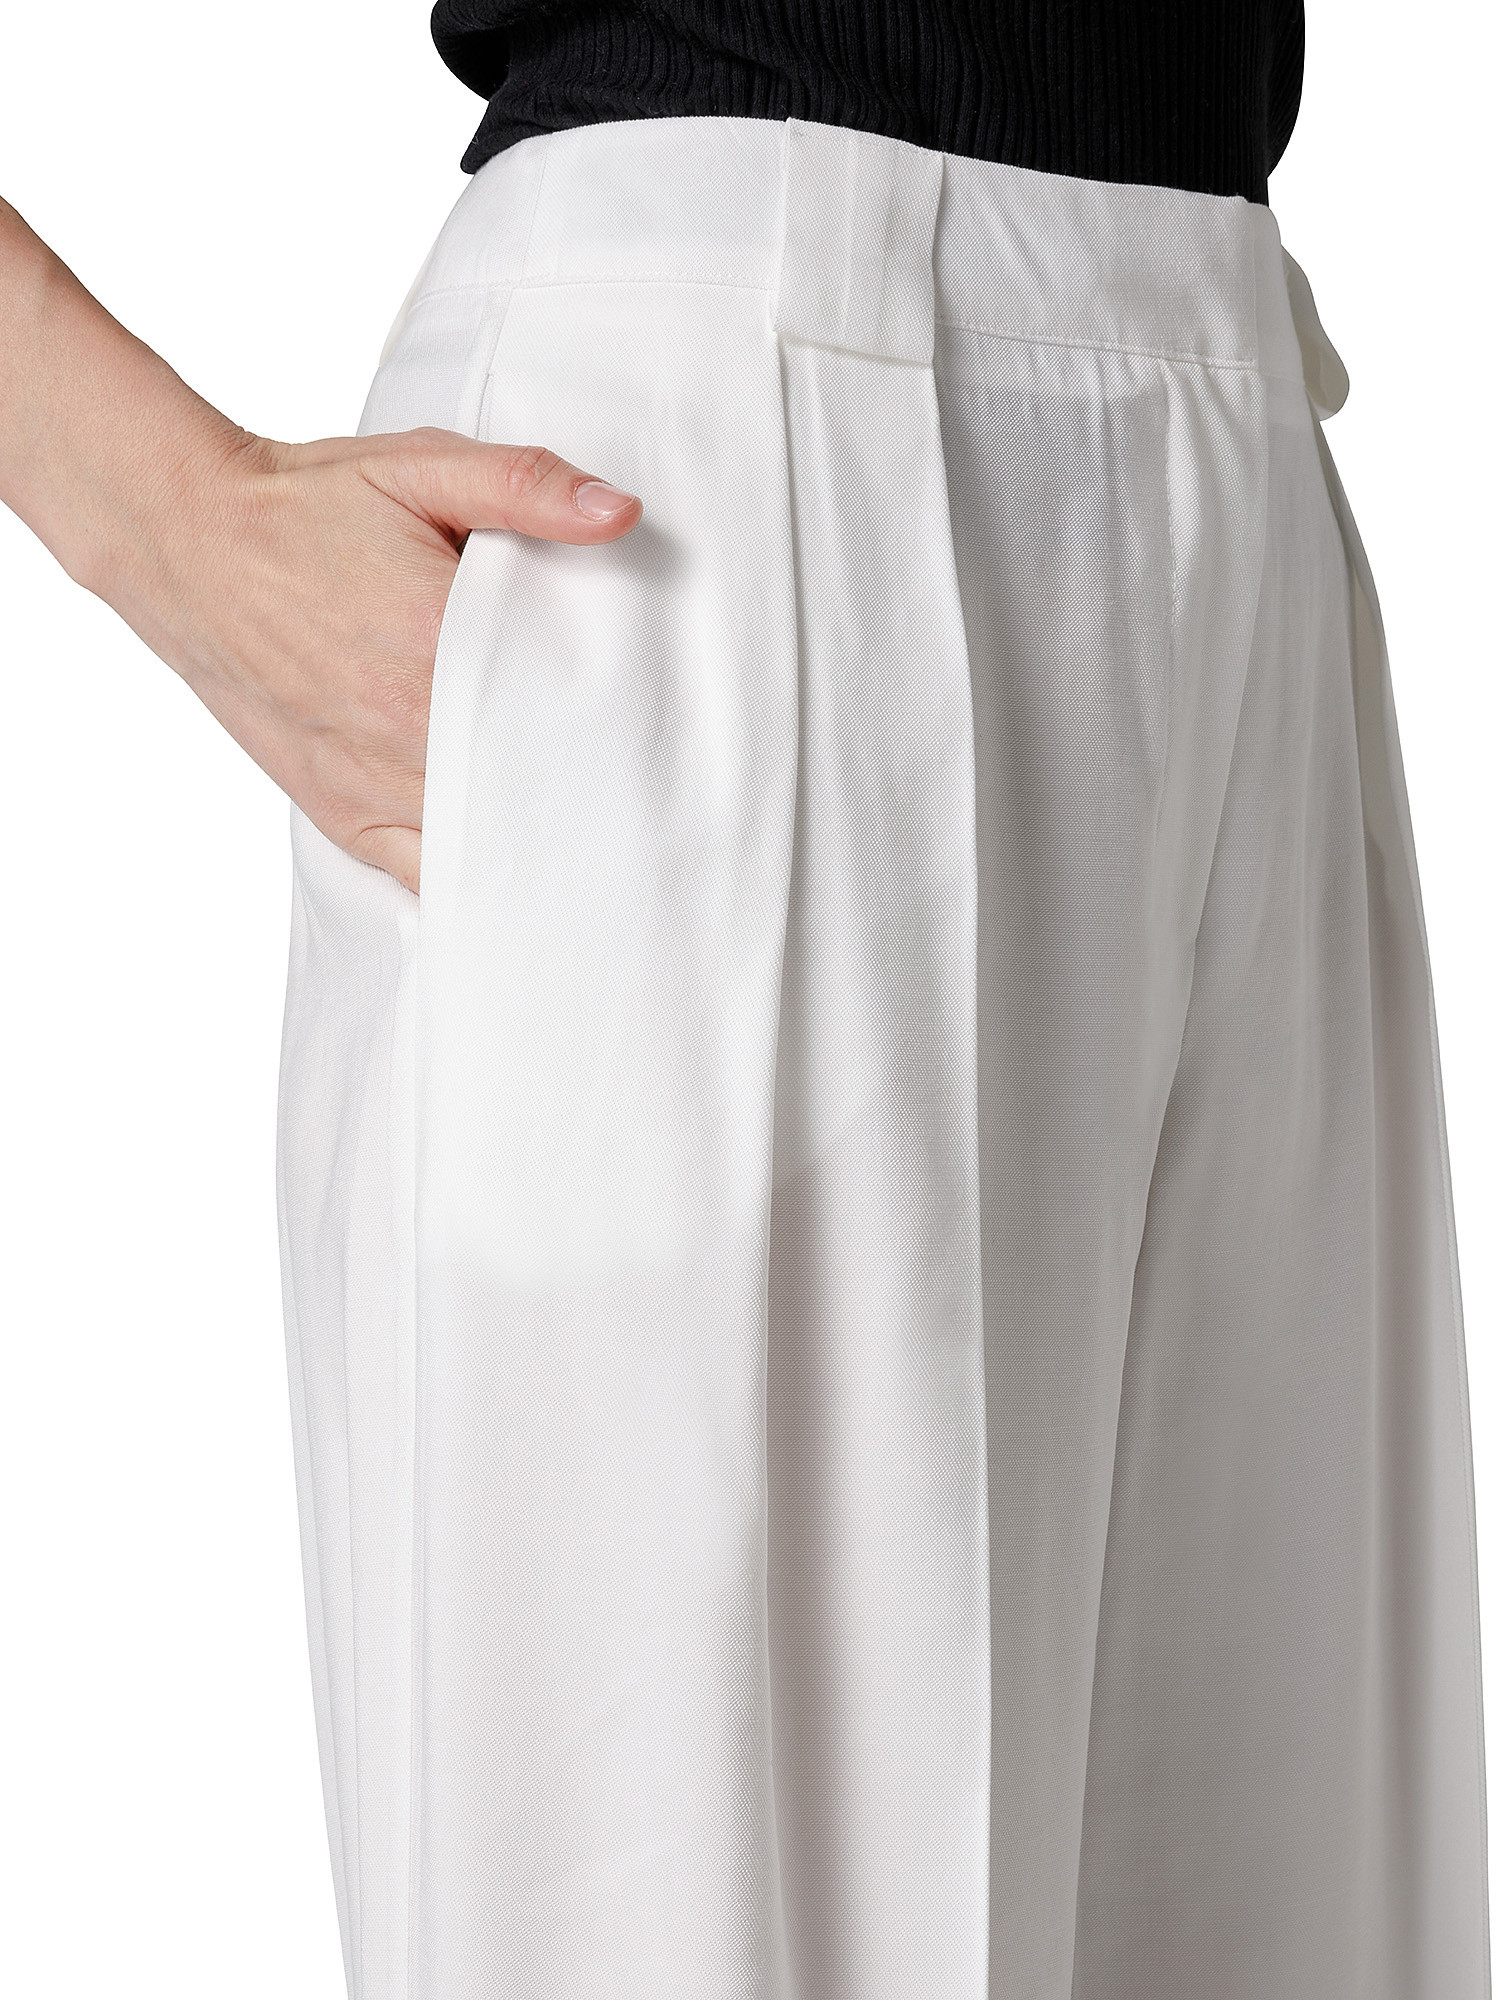 Trousers, White, large image number 4